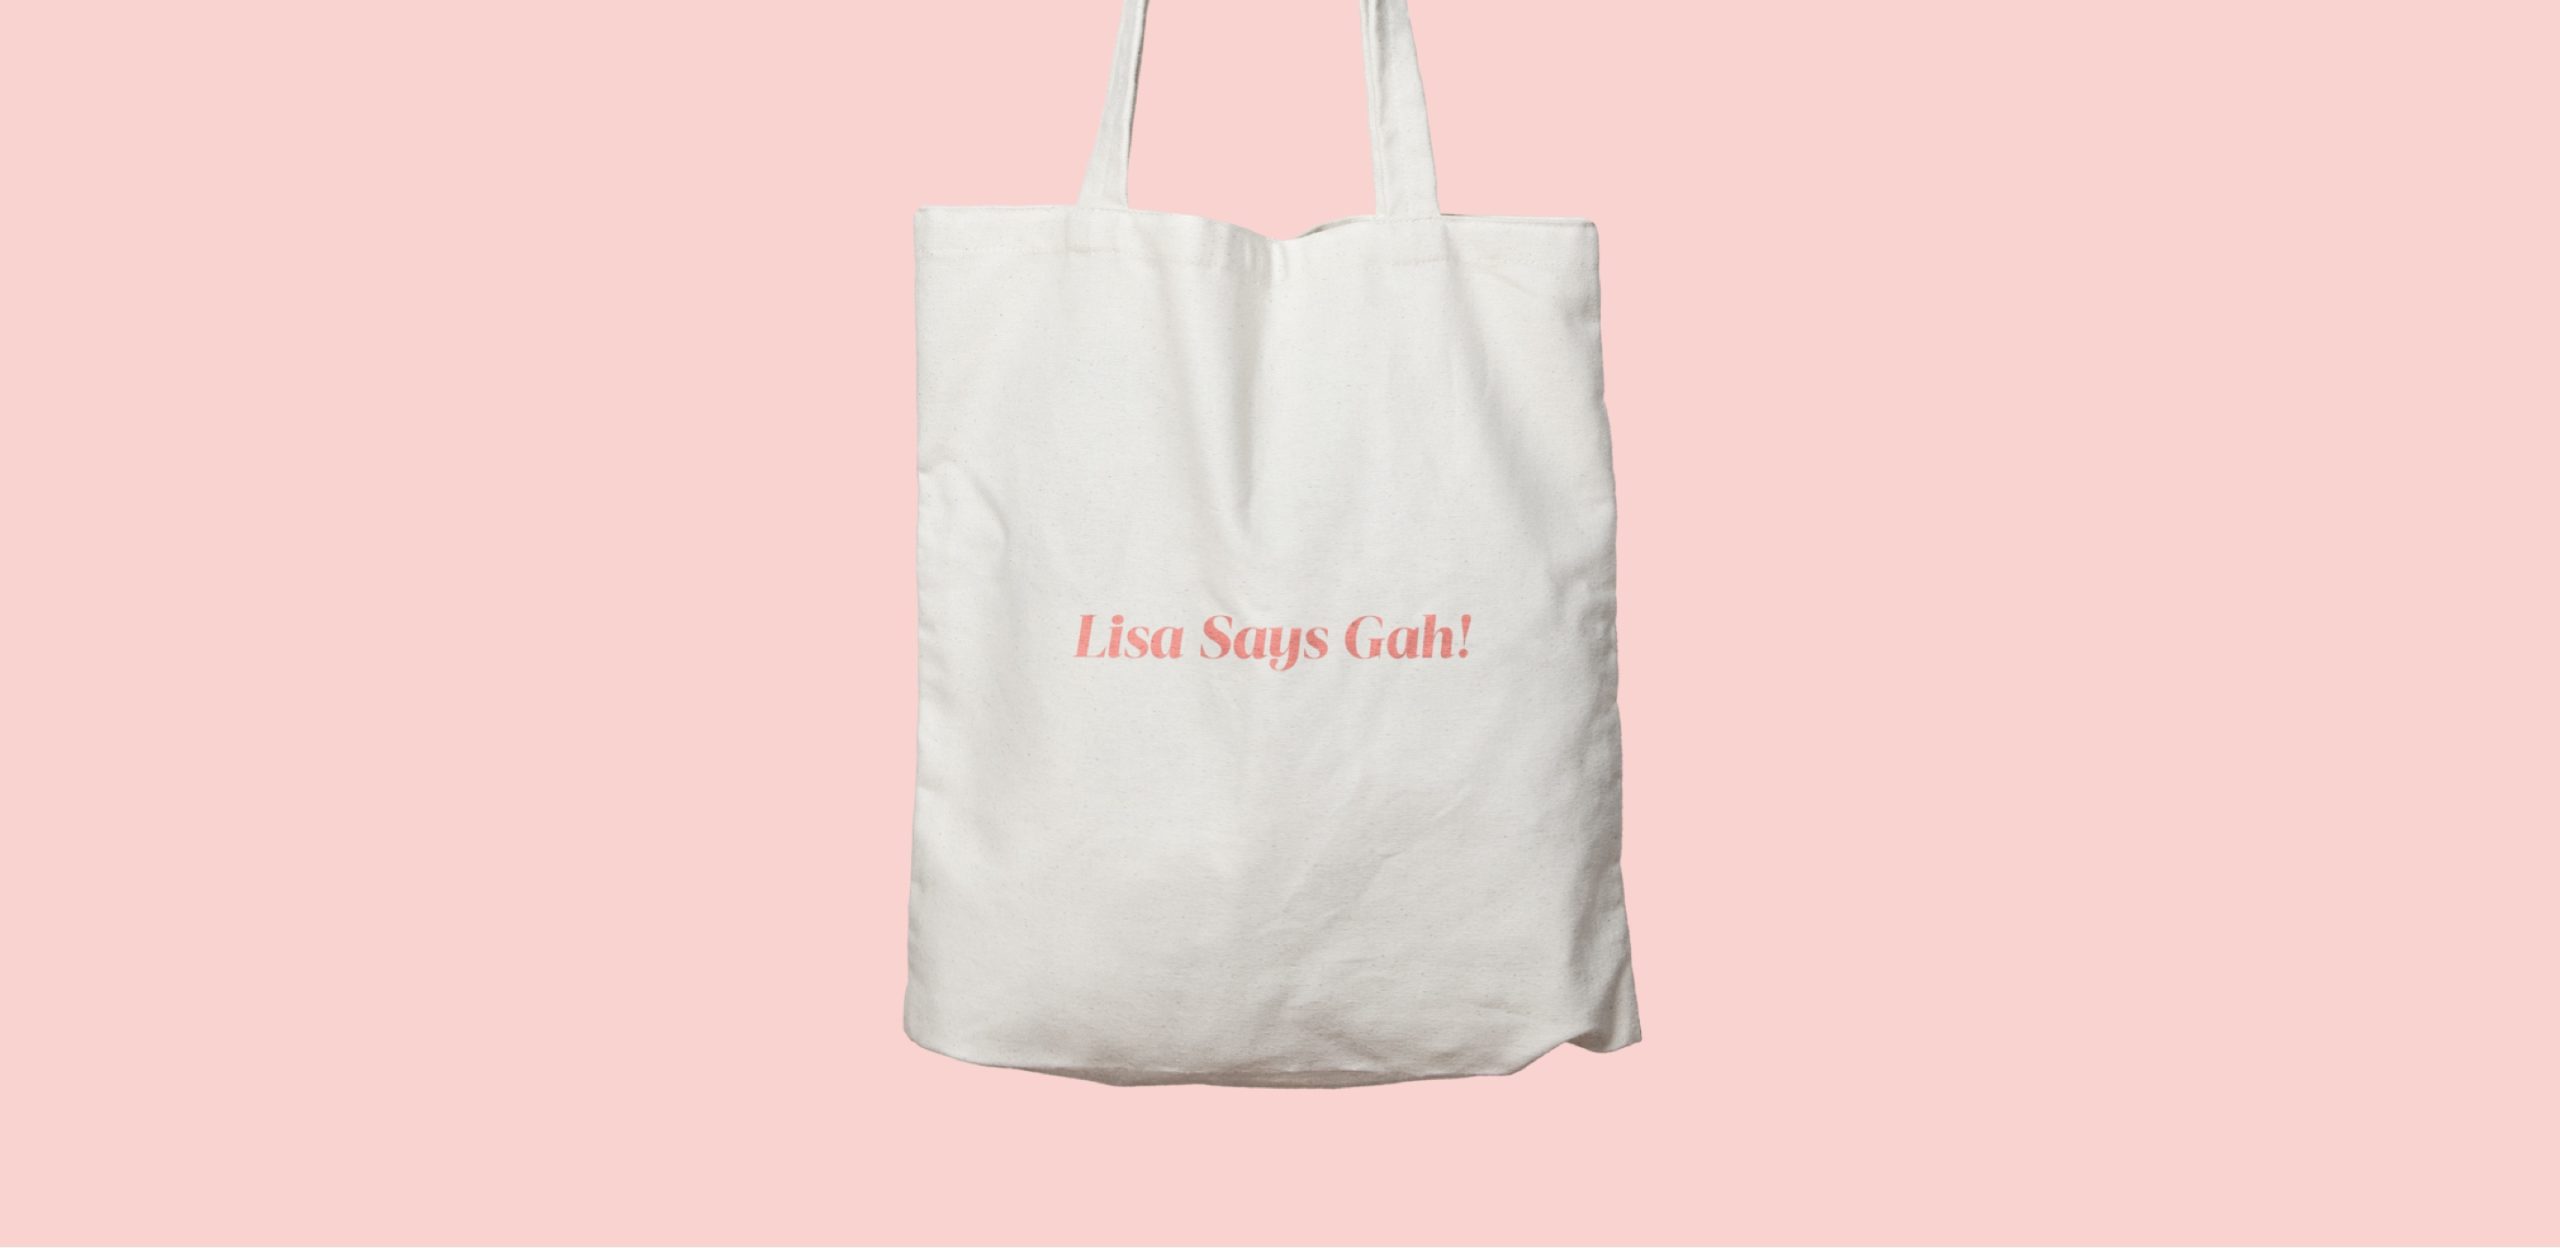 White fabric bag on pink background